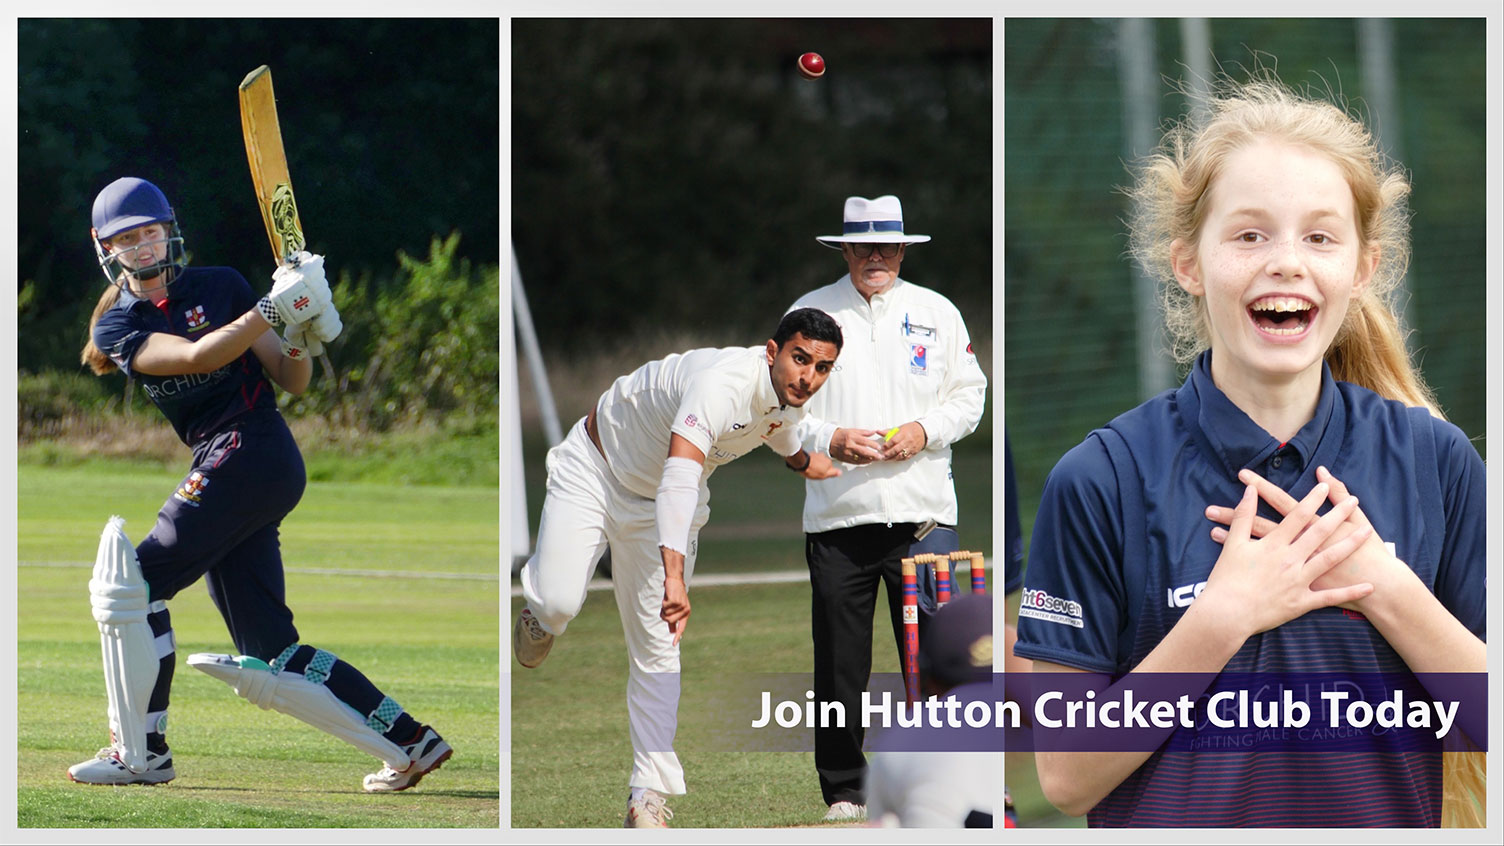 Join Hutton Cricket Club Today